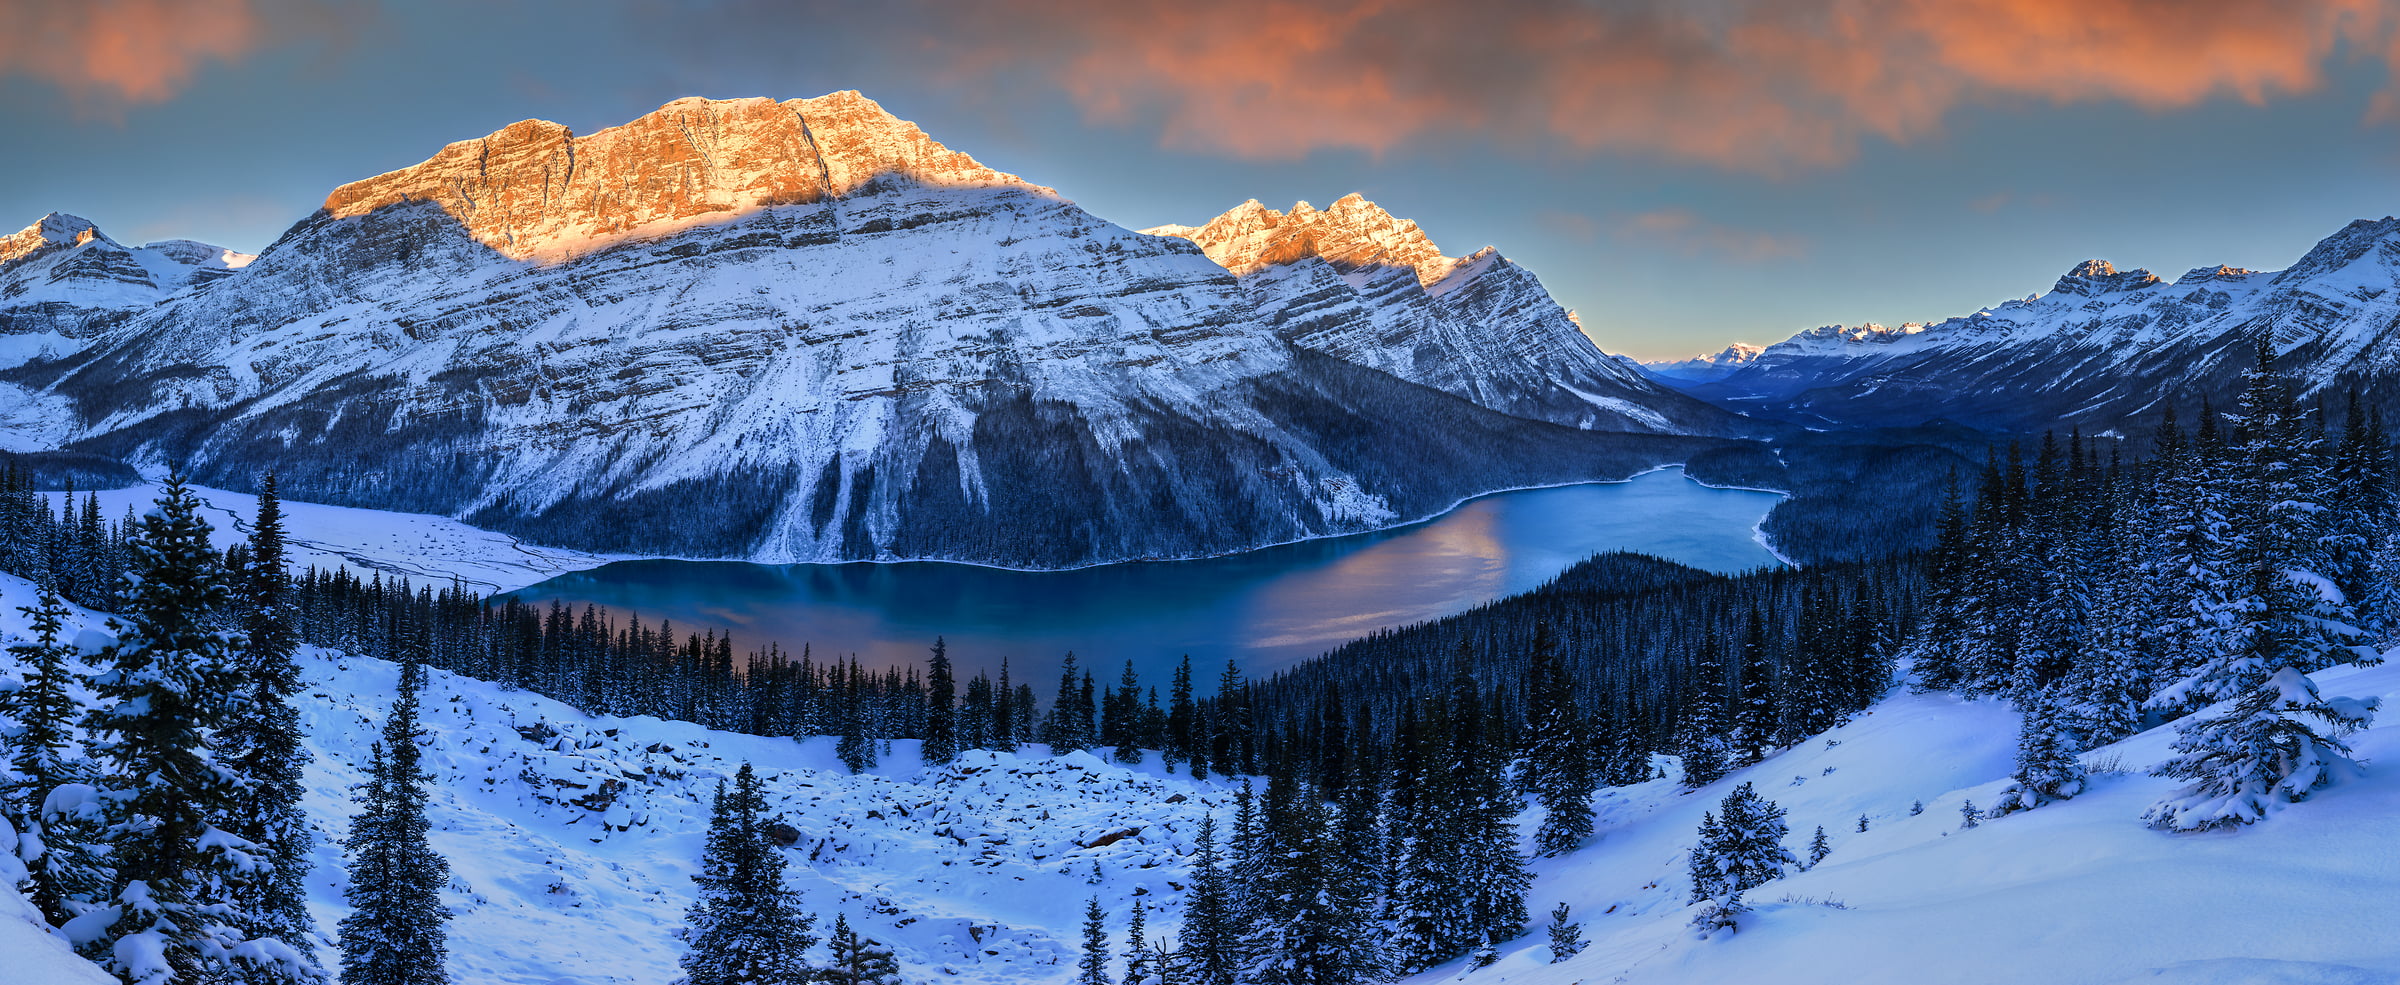 1,178 megapixels! A very high resolution, large-format VAST photo print of a snowy mountain landscape; wallpaper photograph created by Scott Dimond in Peyto Lake, Banff National Park, Alberta, Canada.